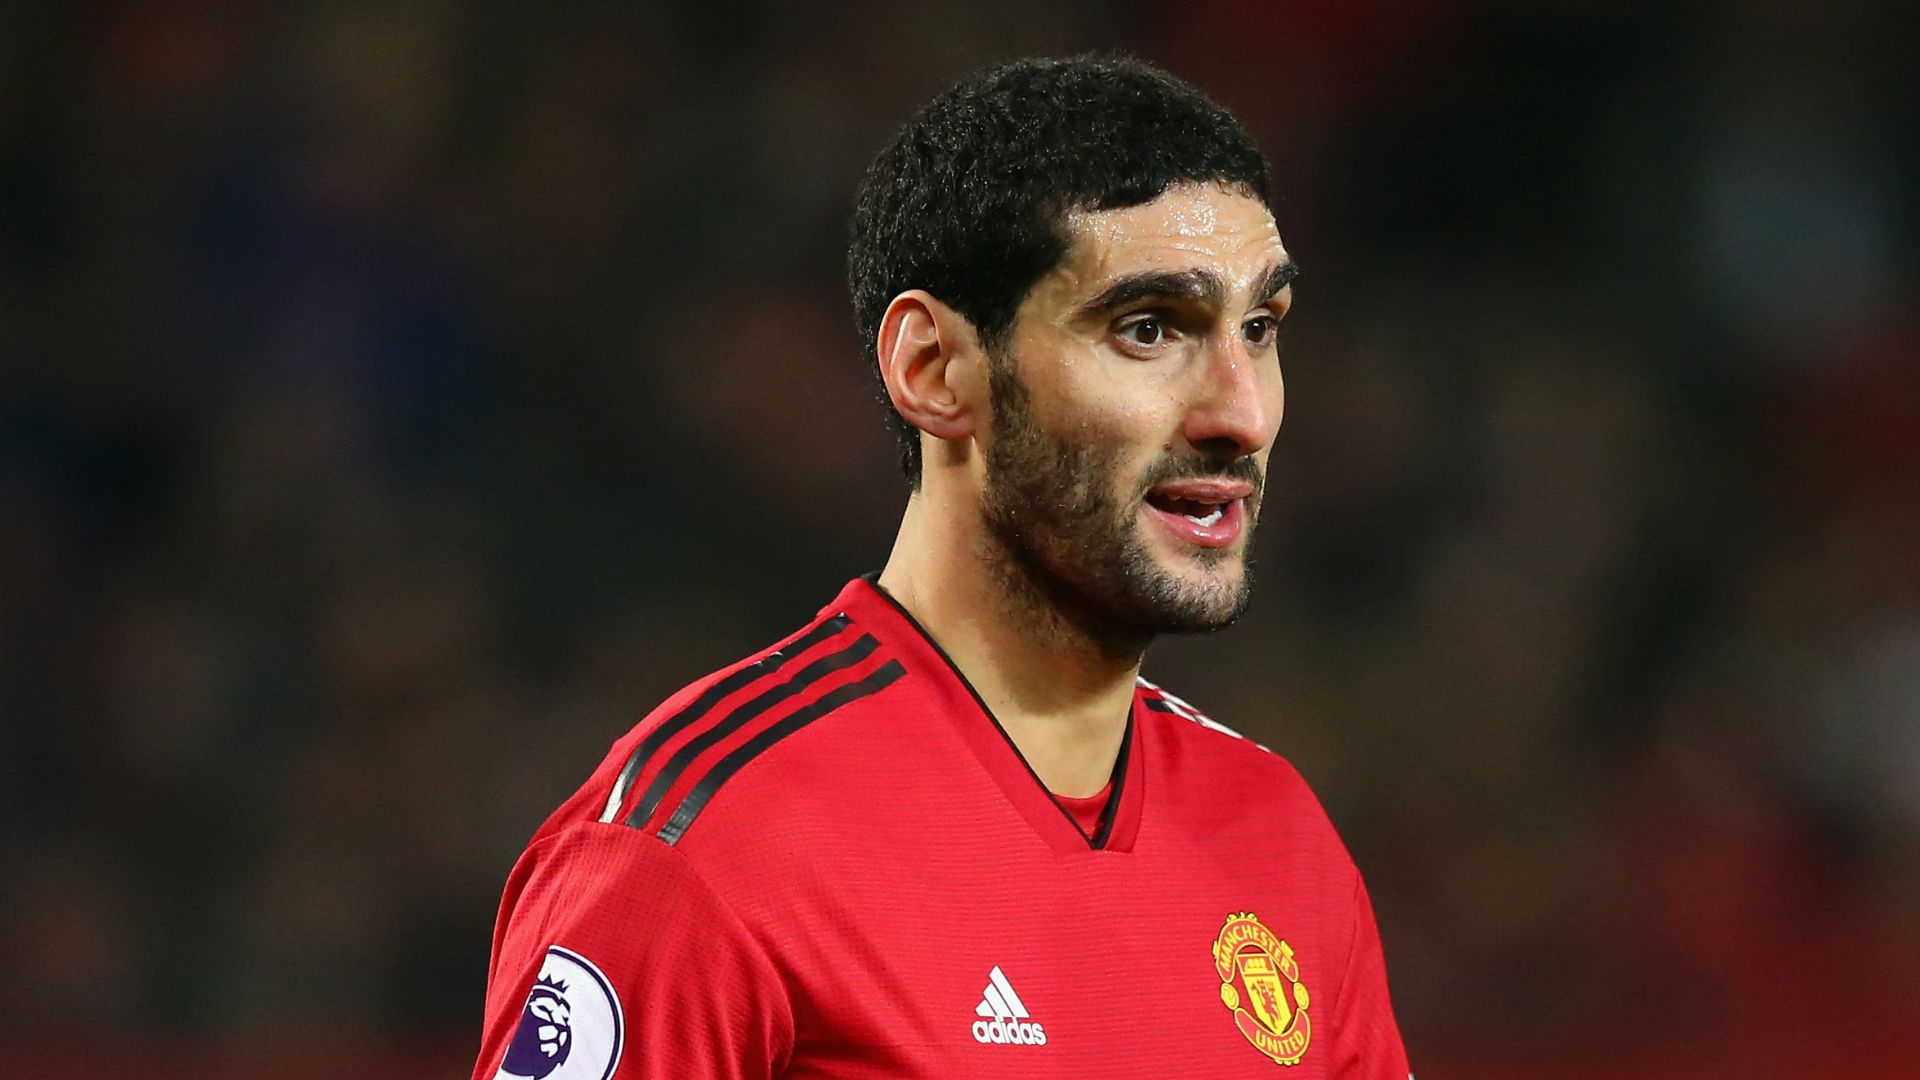 marouane fellaini nears departure of Manchester United to the Chinese Super League on transfer deadline day